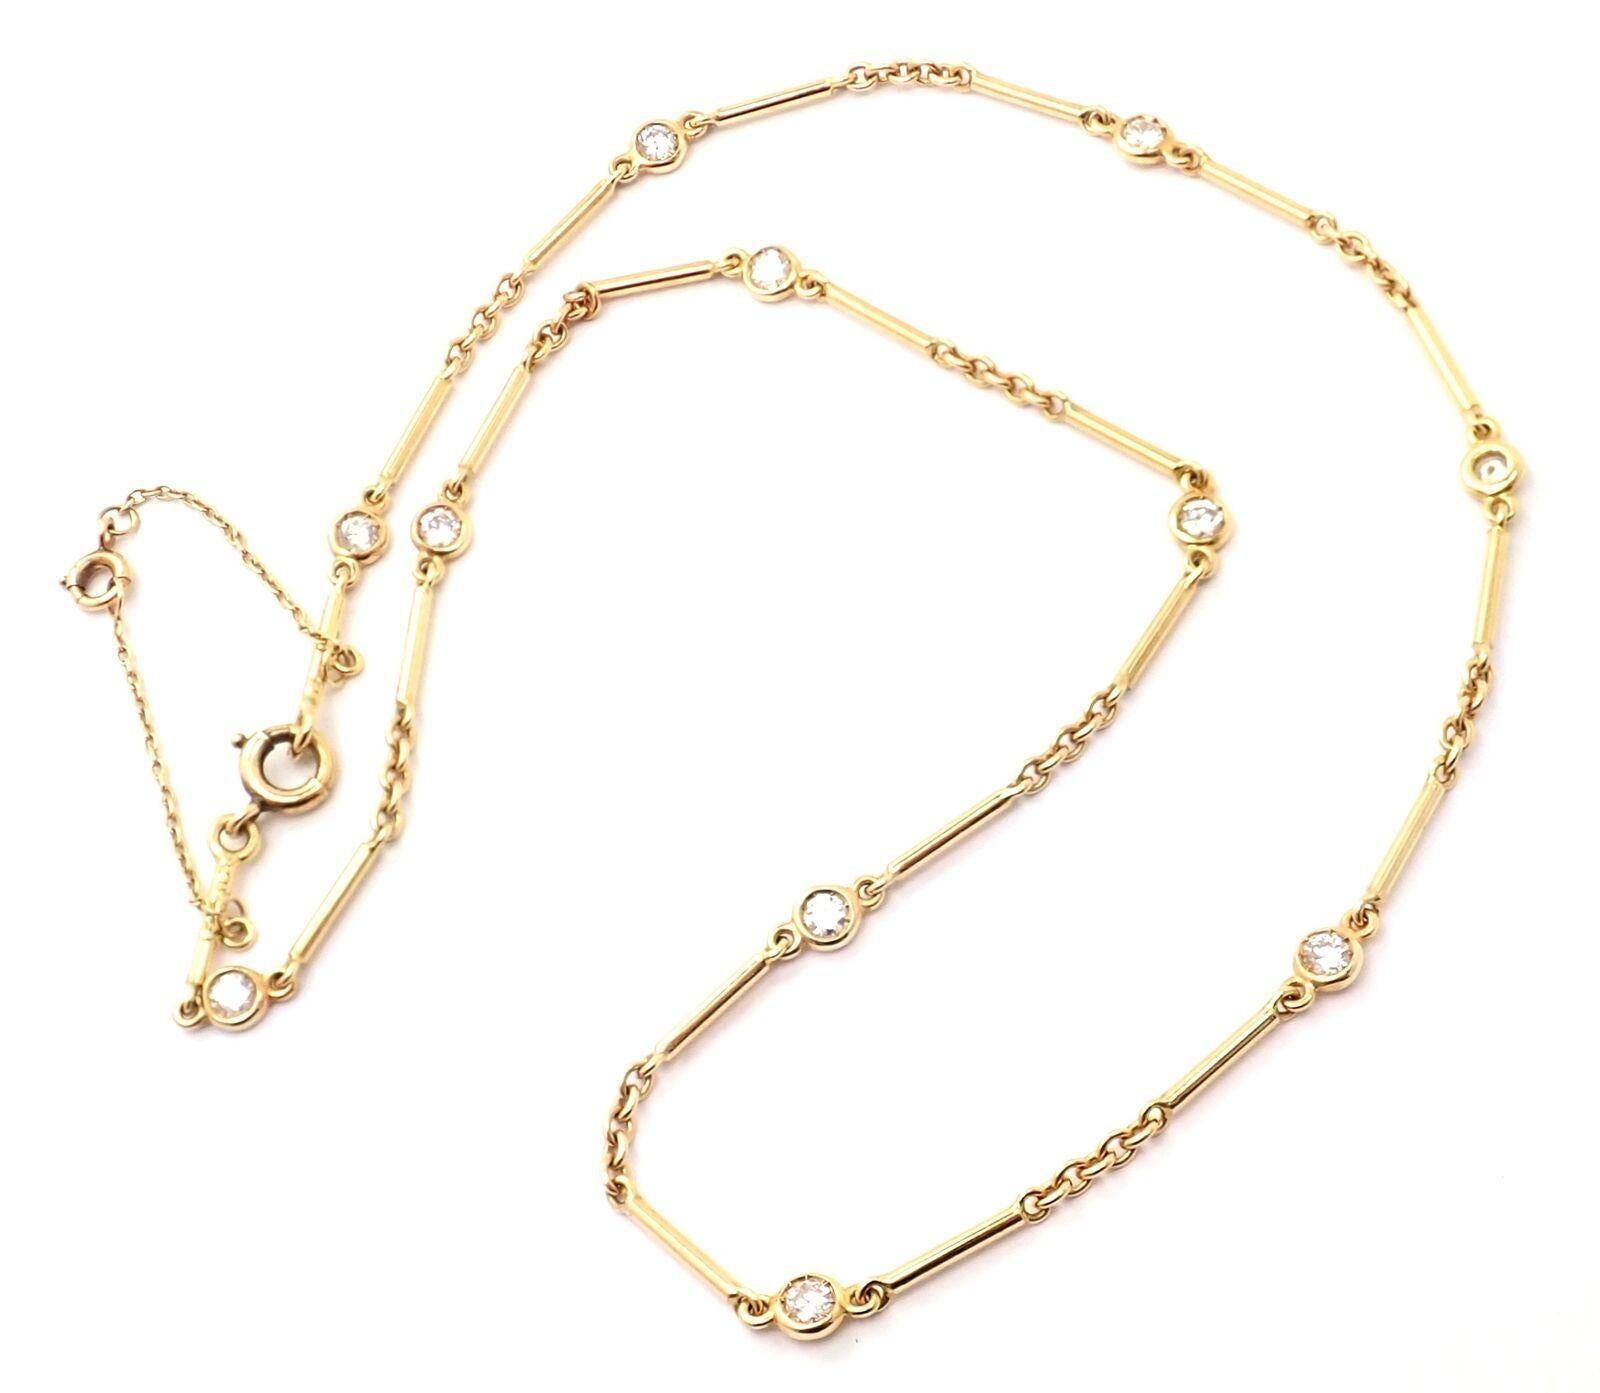 Brilliant Cut Cartier Diamond by the Yard Choker Yellow Gold Necklace